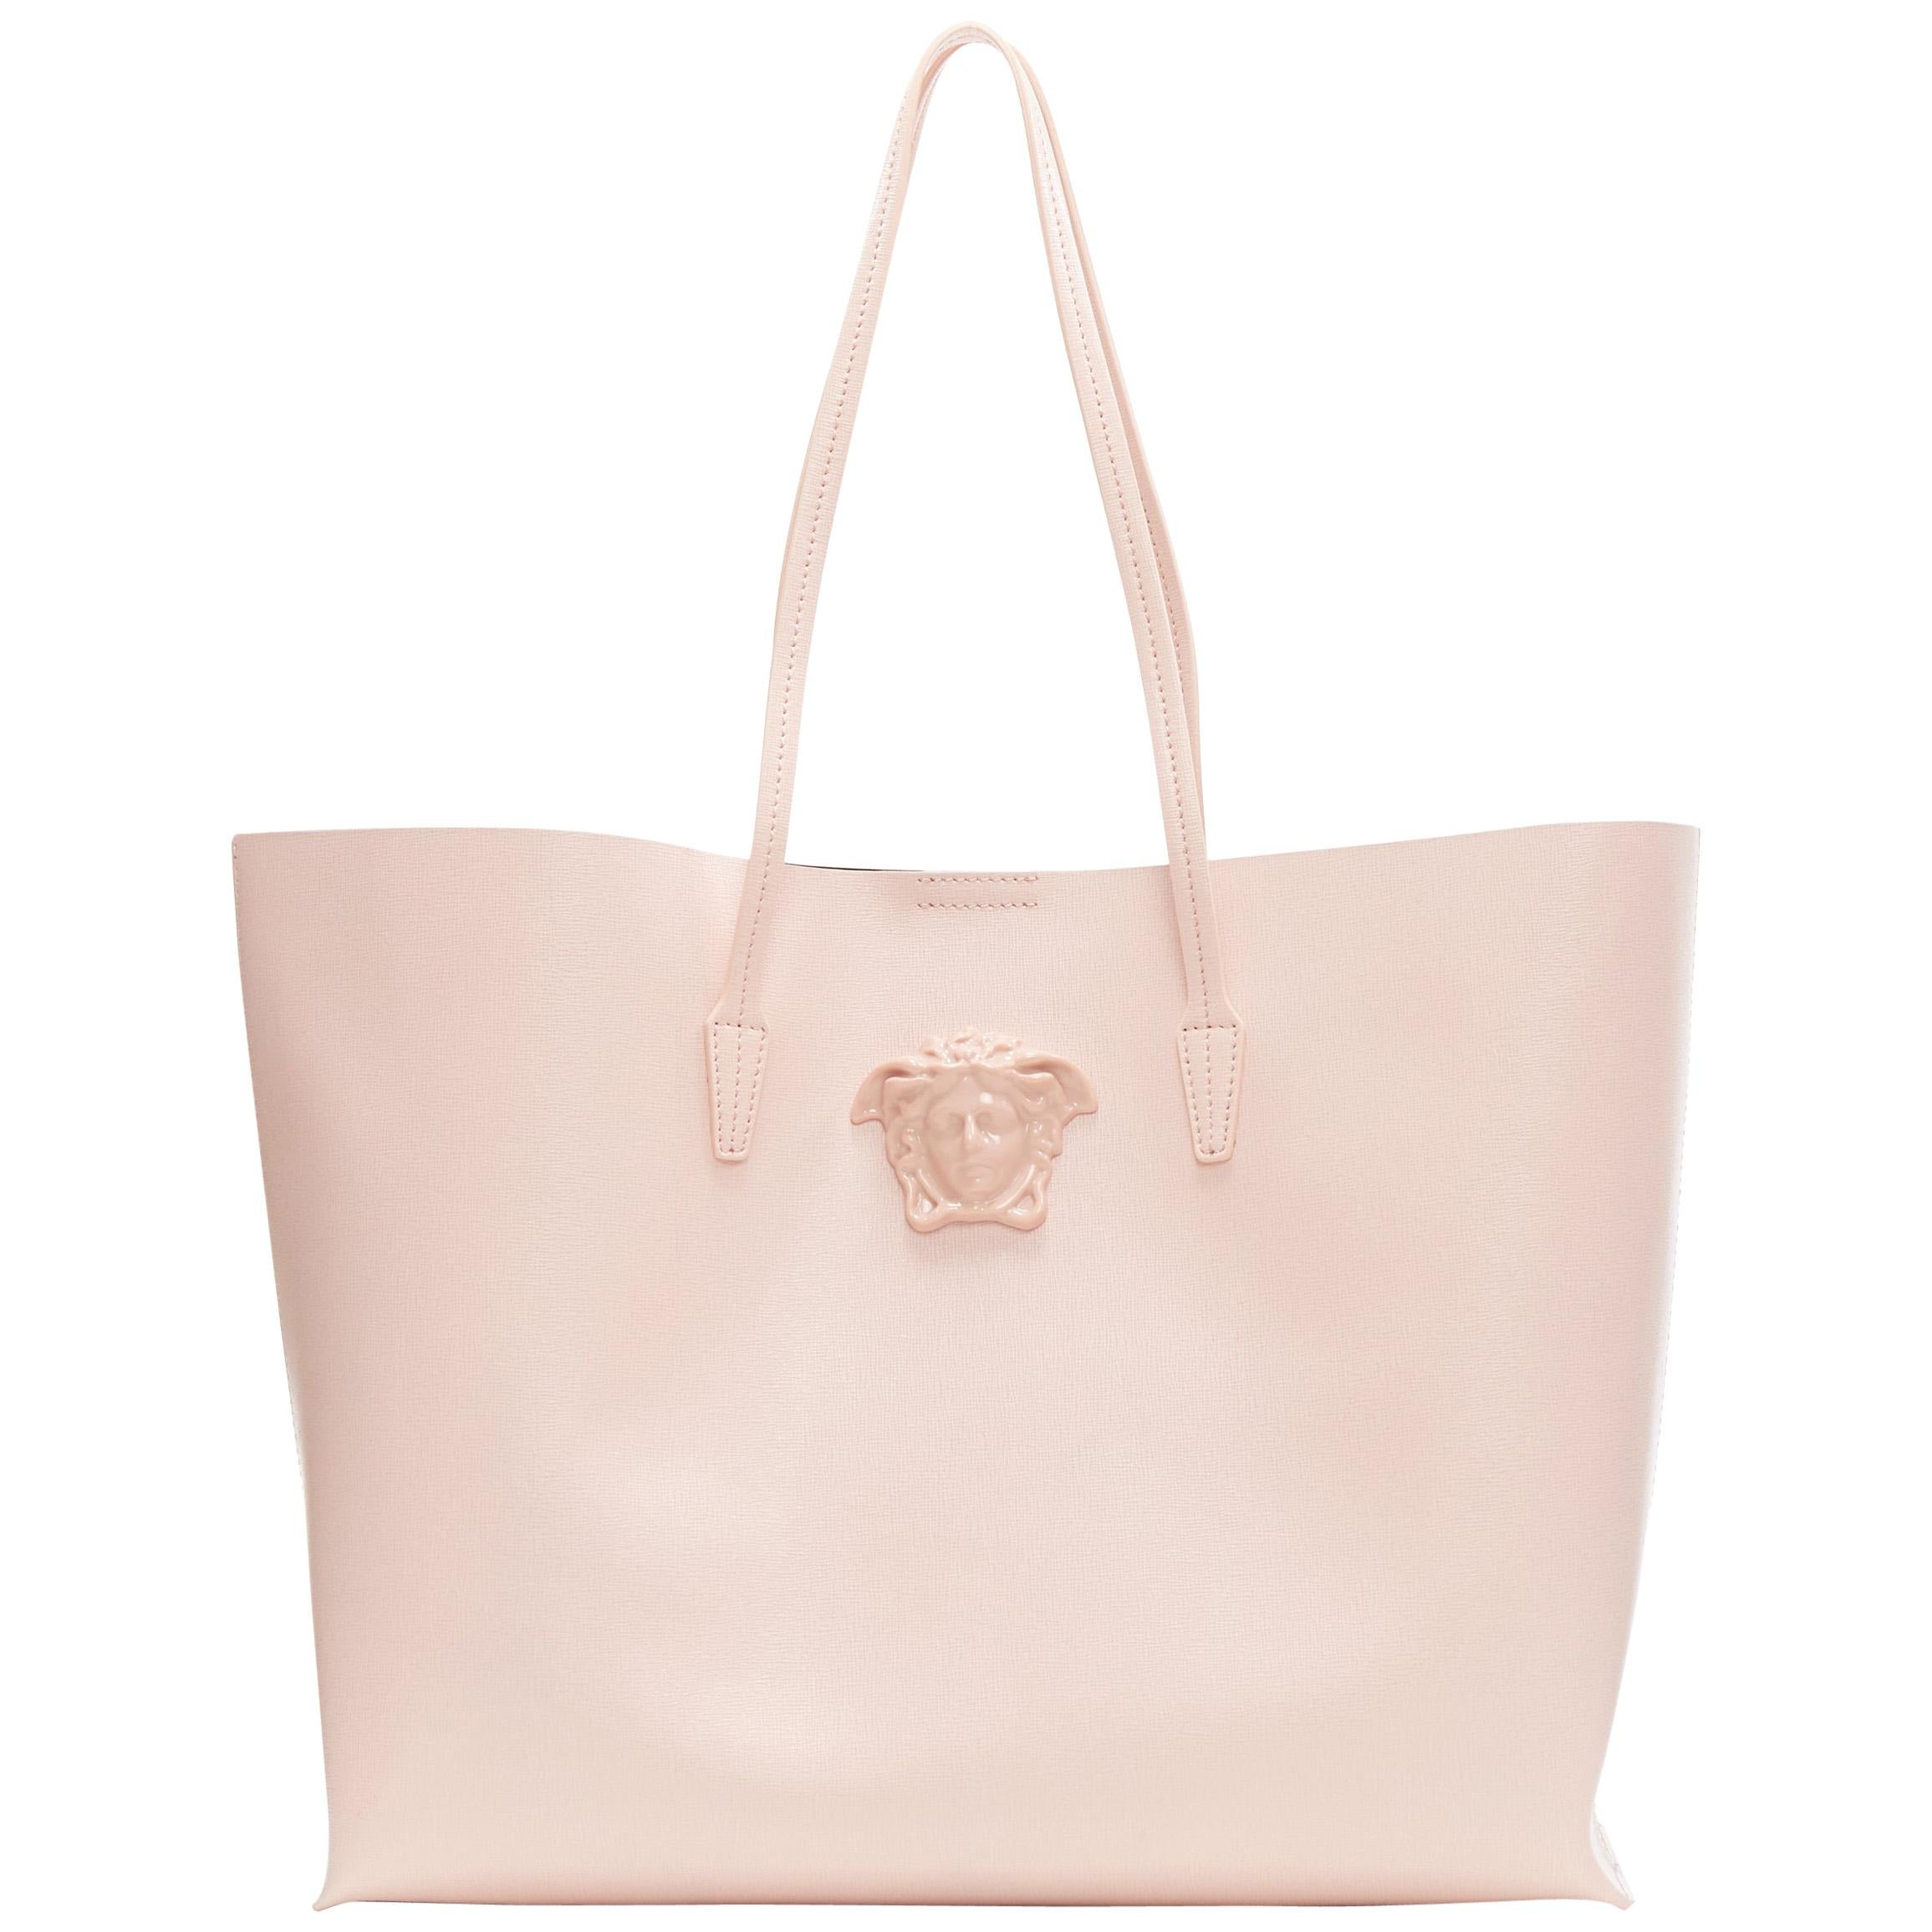 new VERSACE Palazzo Medusa light pink saffiano leather large neverfull tote bag